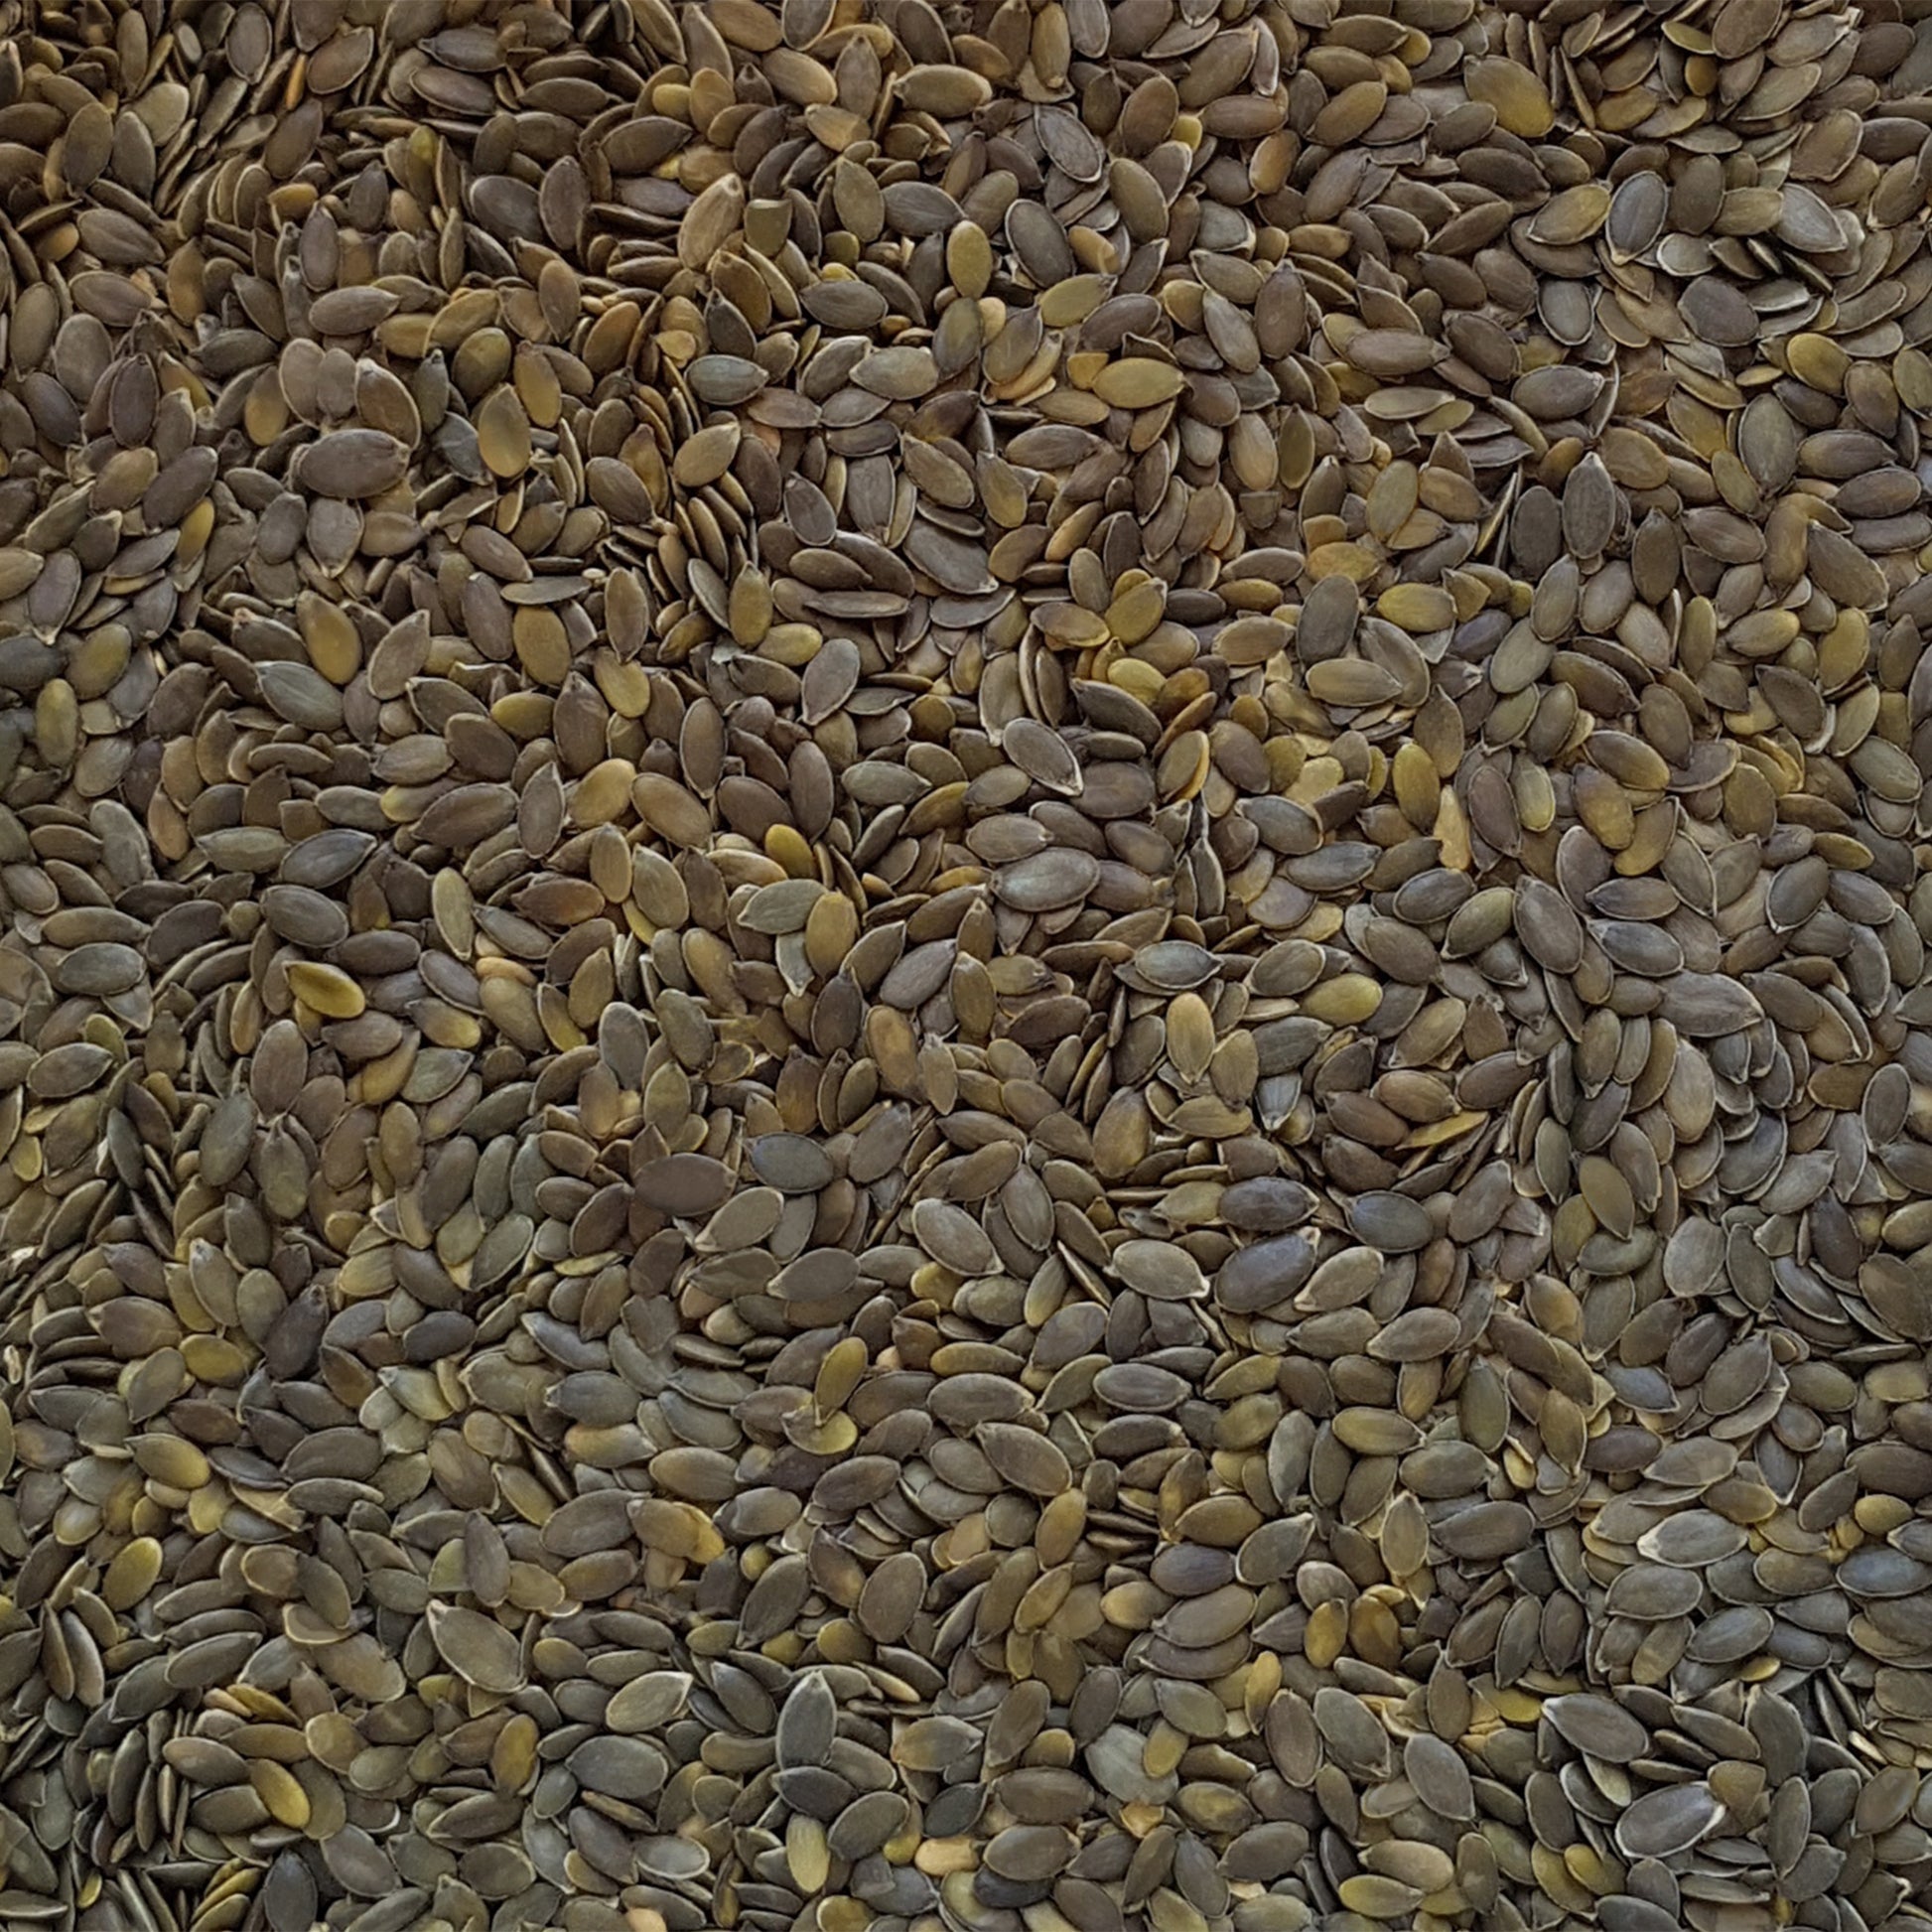 Full frame overhead image of BY NATURE Pumpkin Seeds - hulled, raw, certified organic at source.